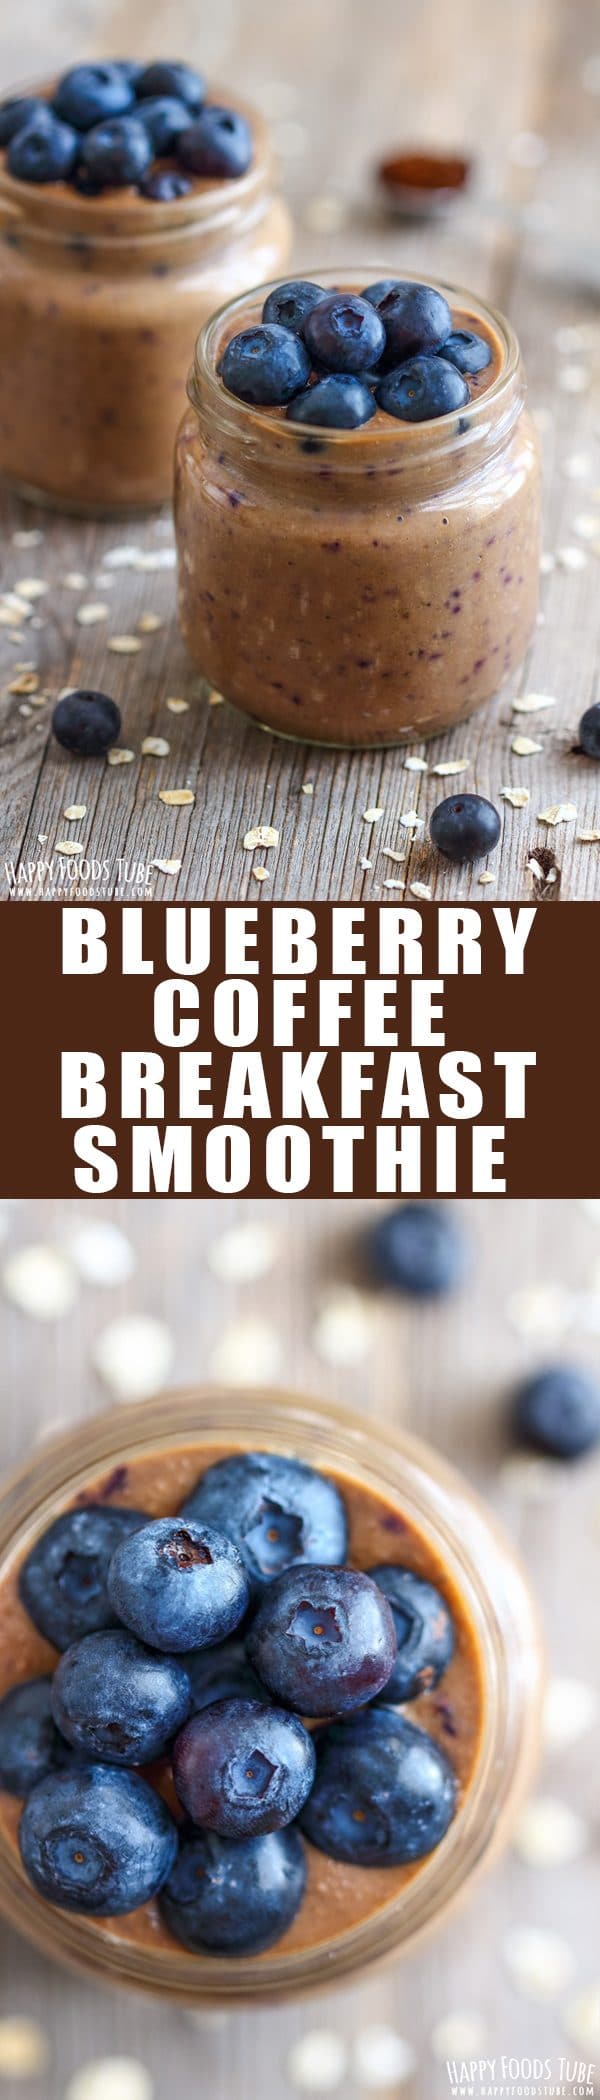 How To Make Blueberry Coffee Smoothie In Cirebon